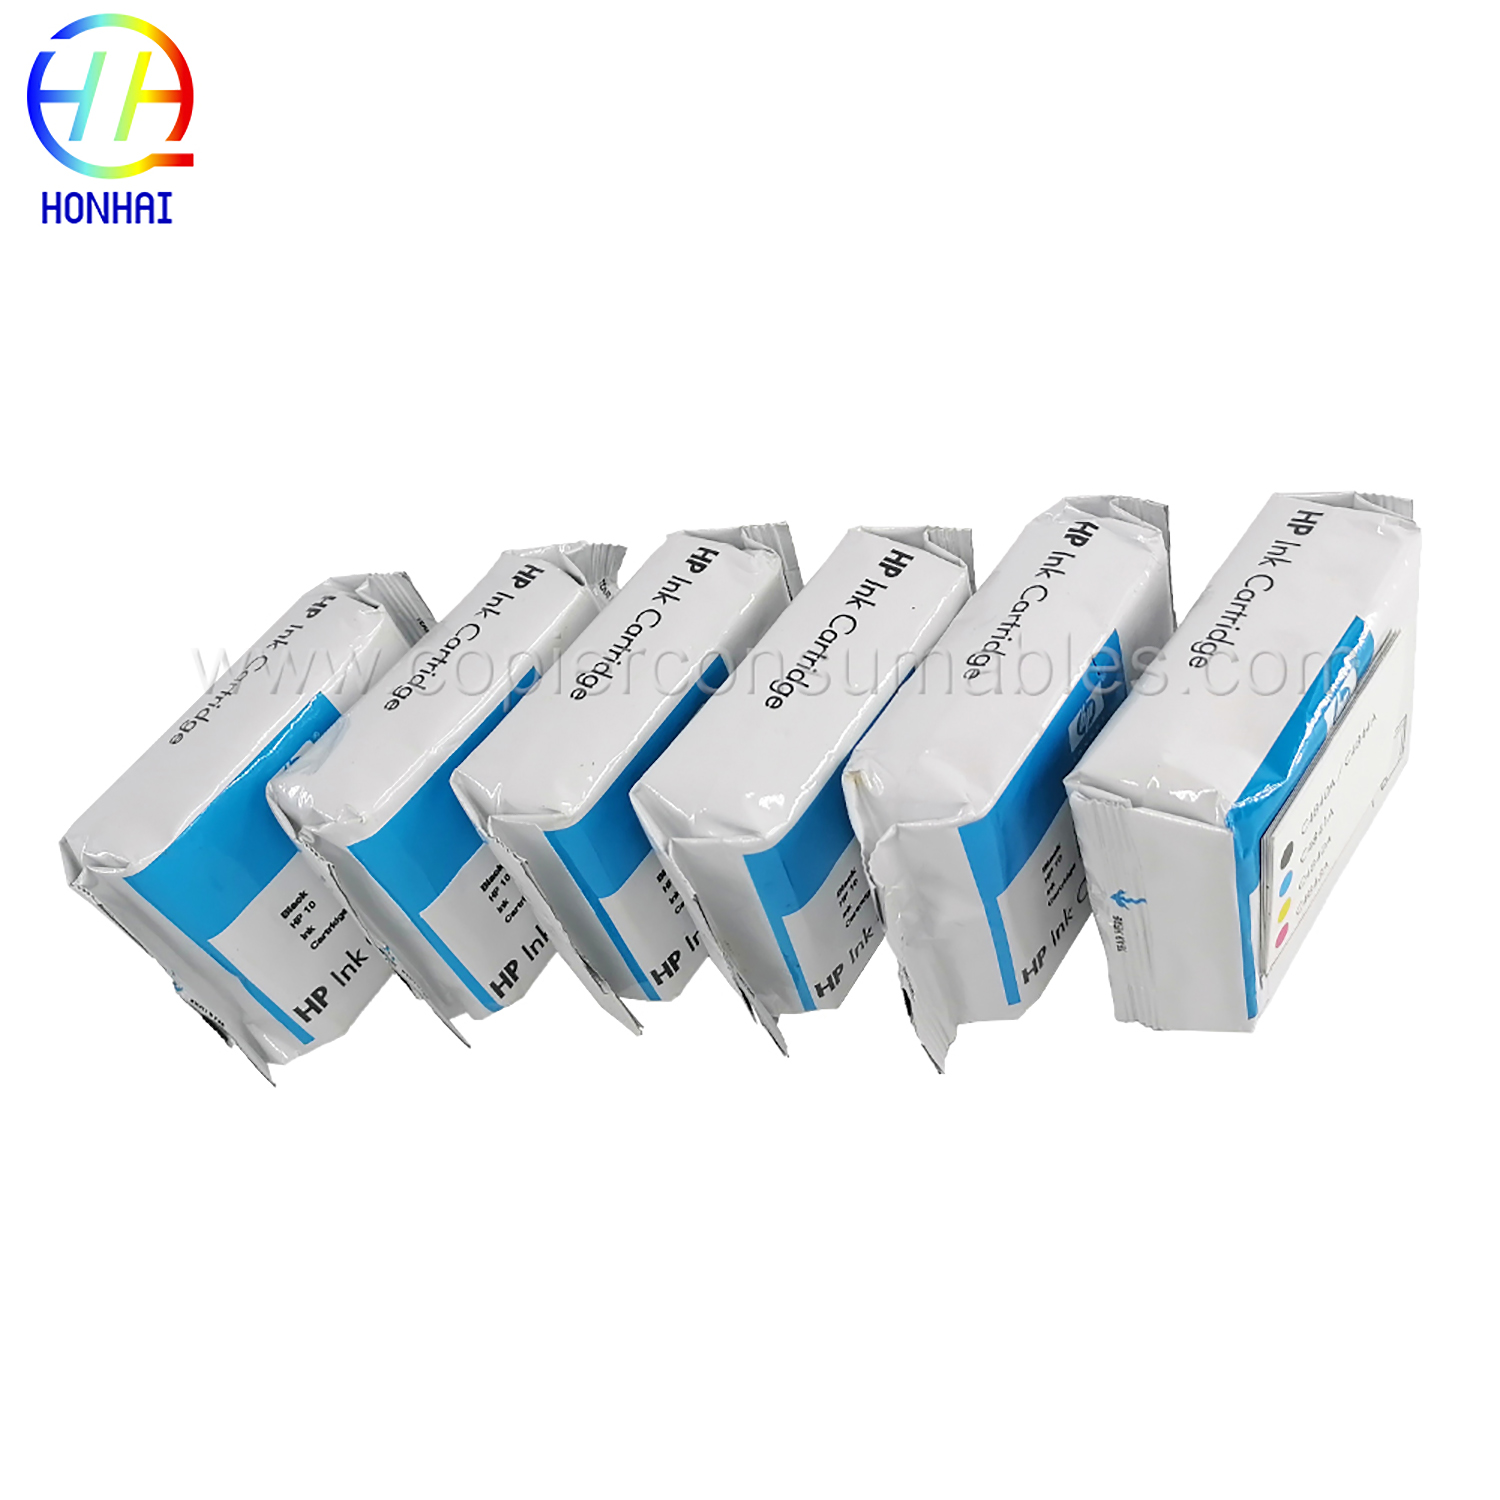 Ink Cartridge Black for HP 10 C4844A (4)